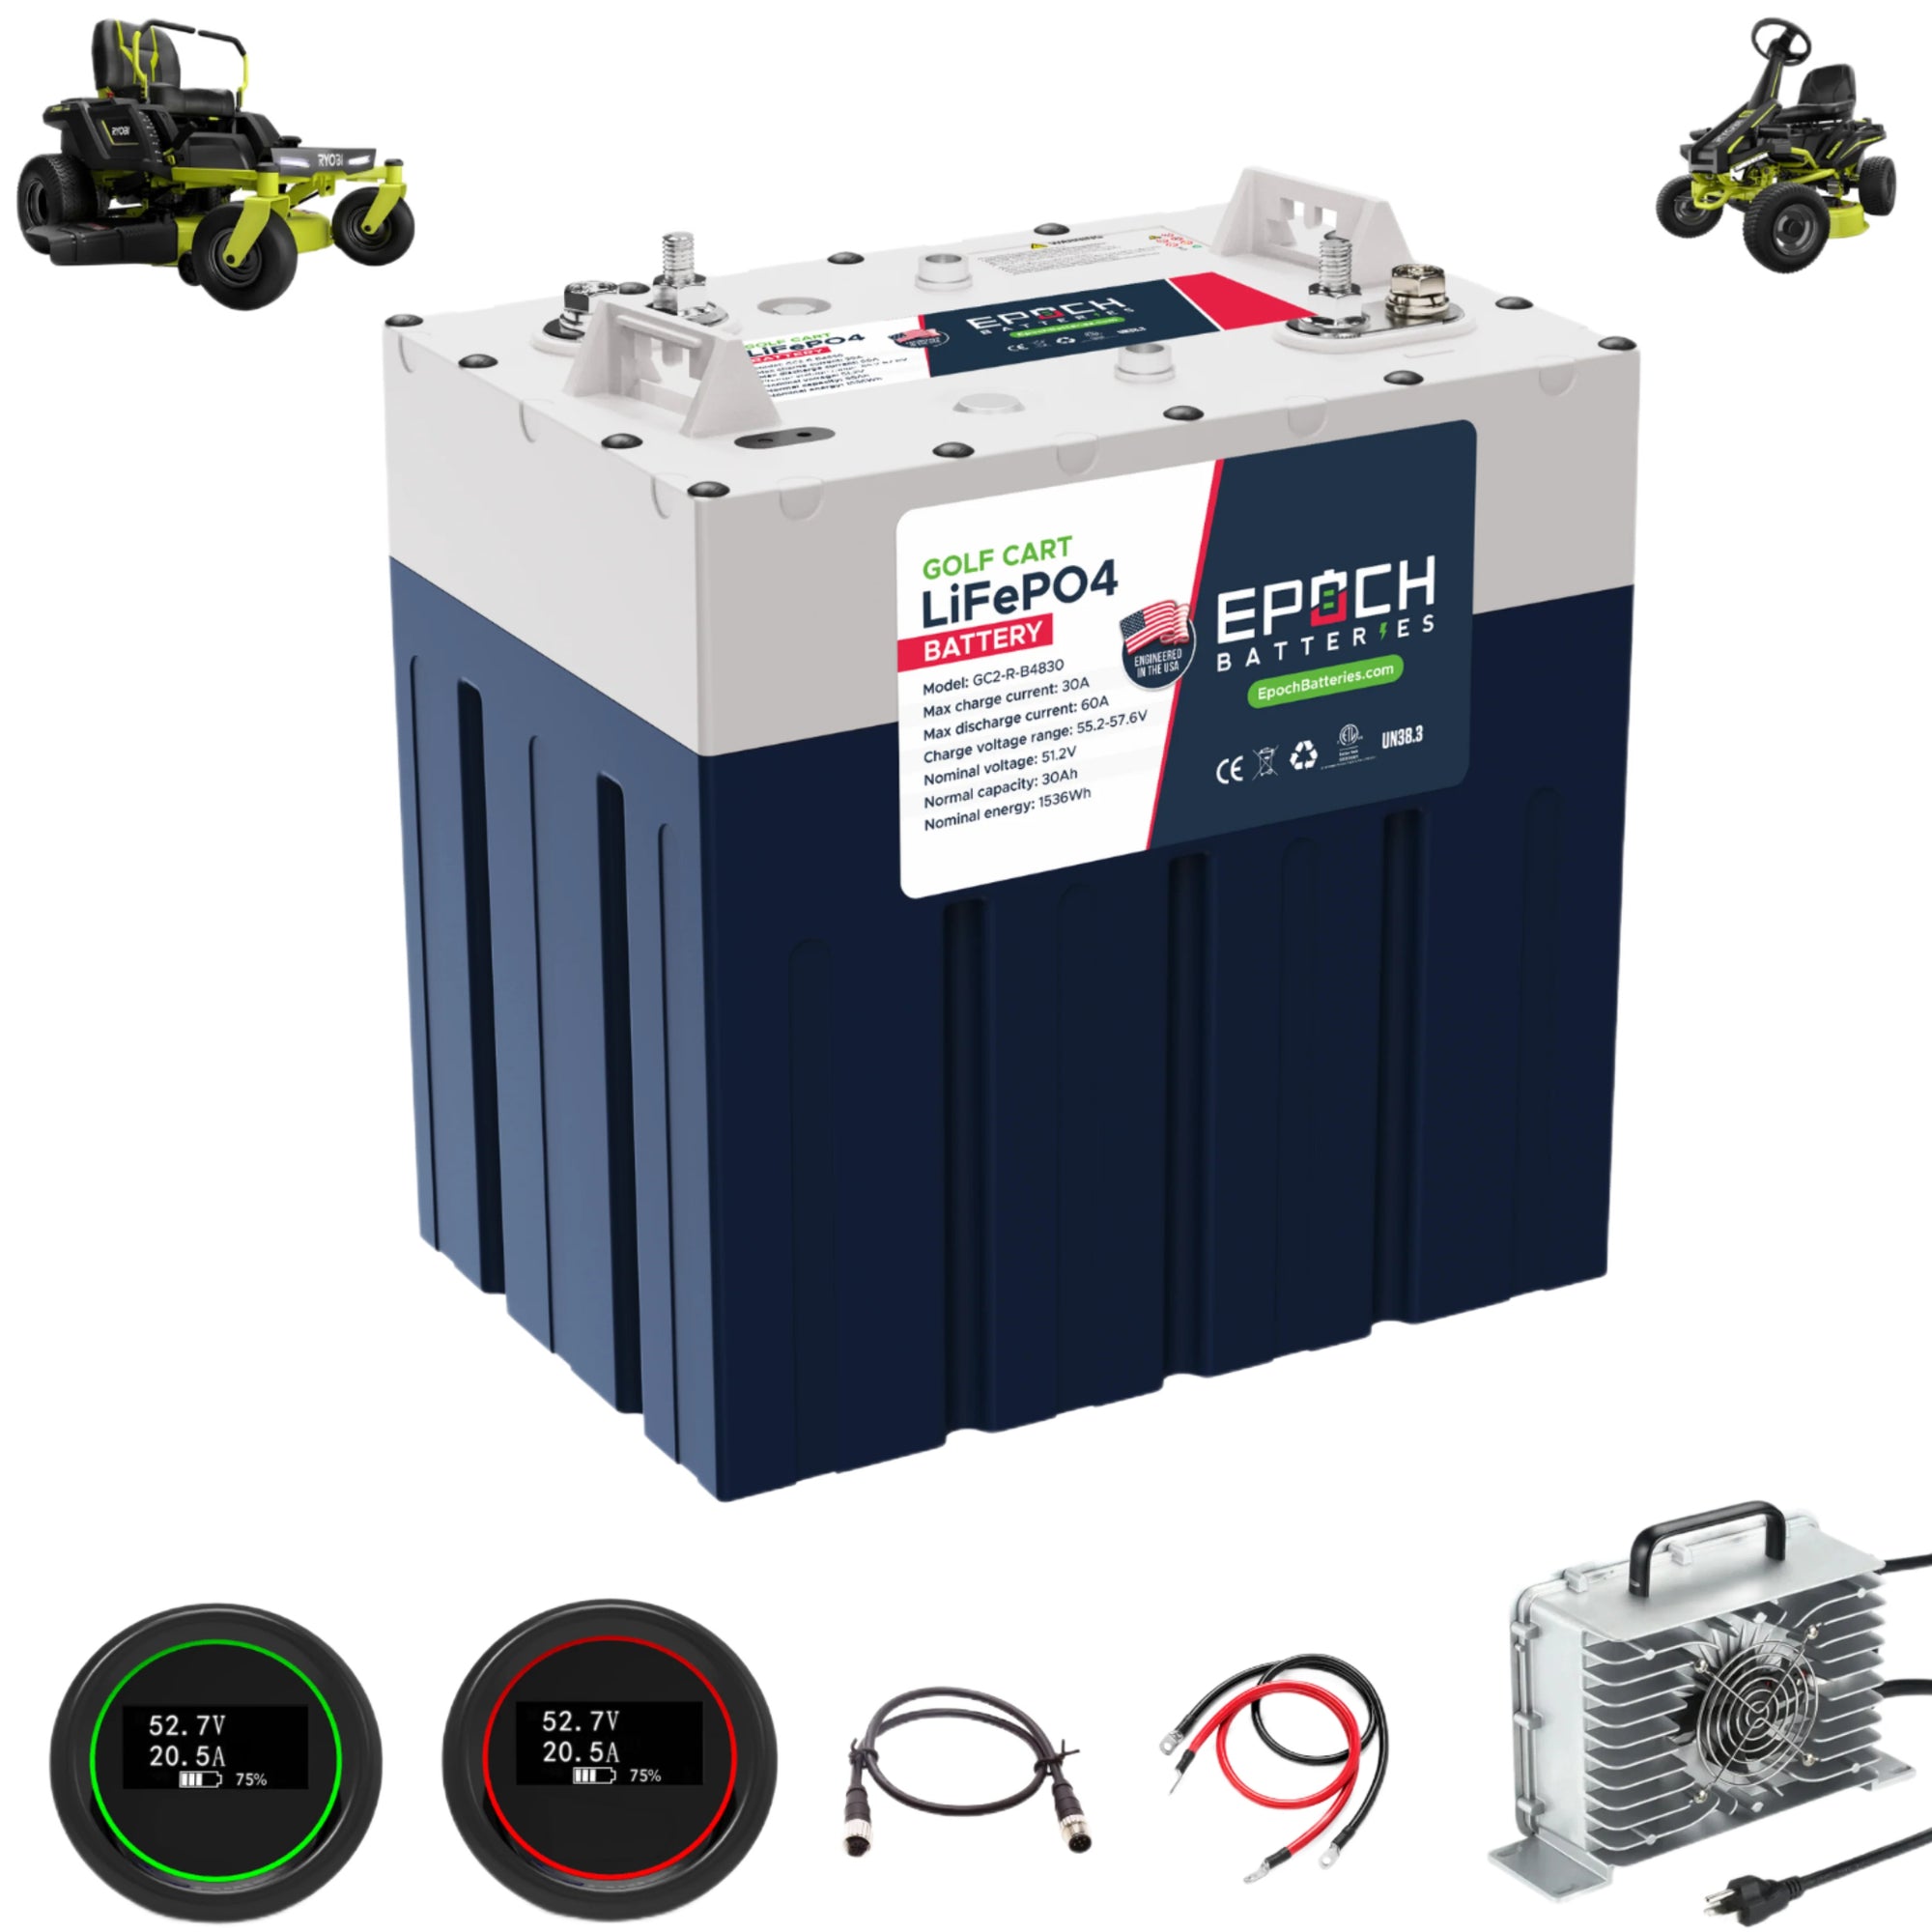 Epoch Batteries - 48V 30Ah Ryobi Electric Lawn Motor - Replacement Lithium Battery Kit